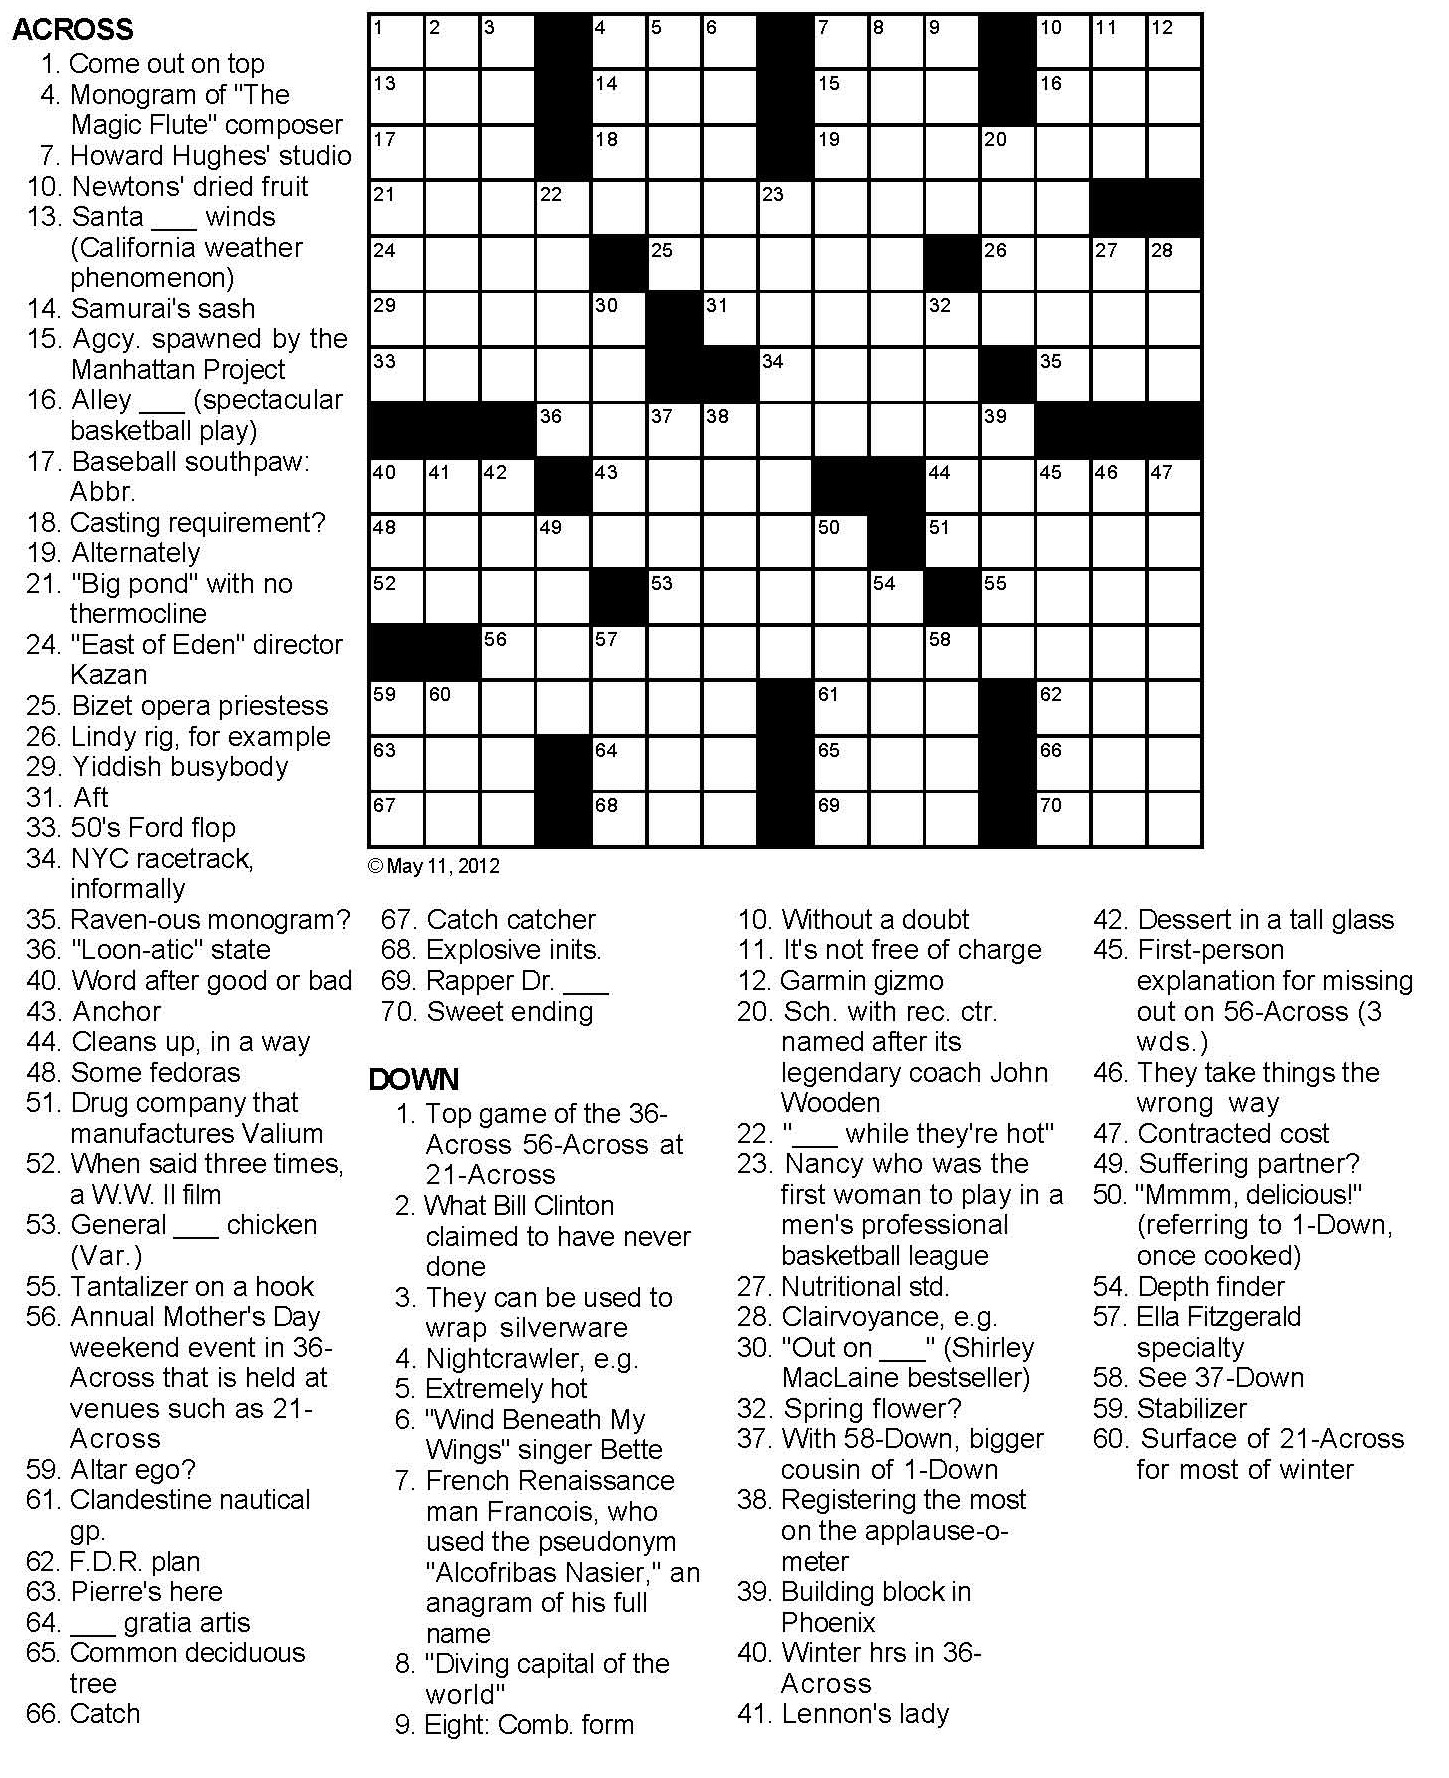 About.com Printable Crossword Puzzles